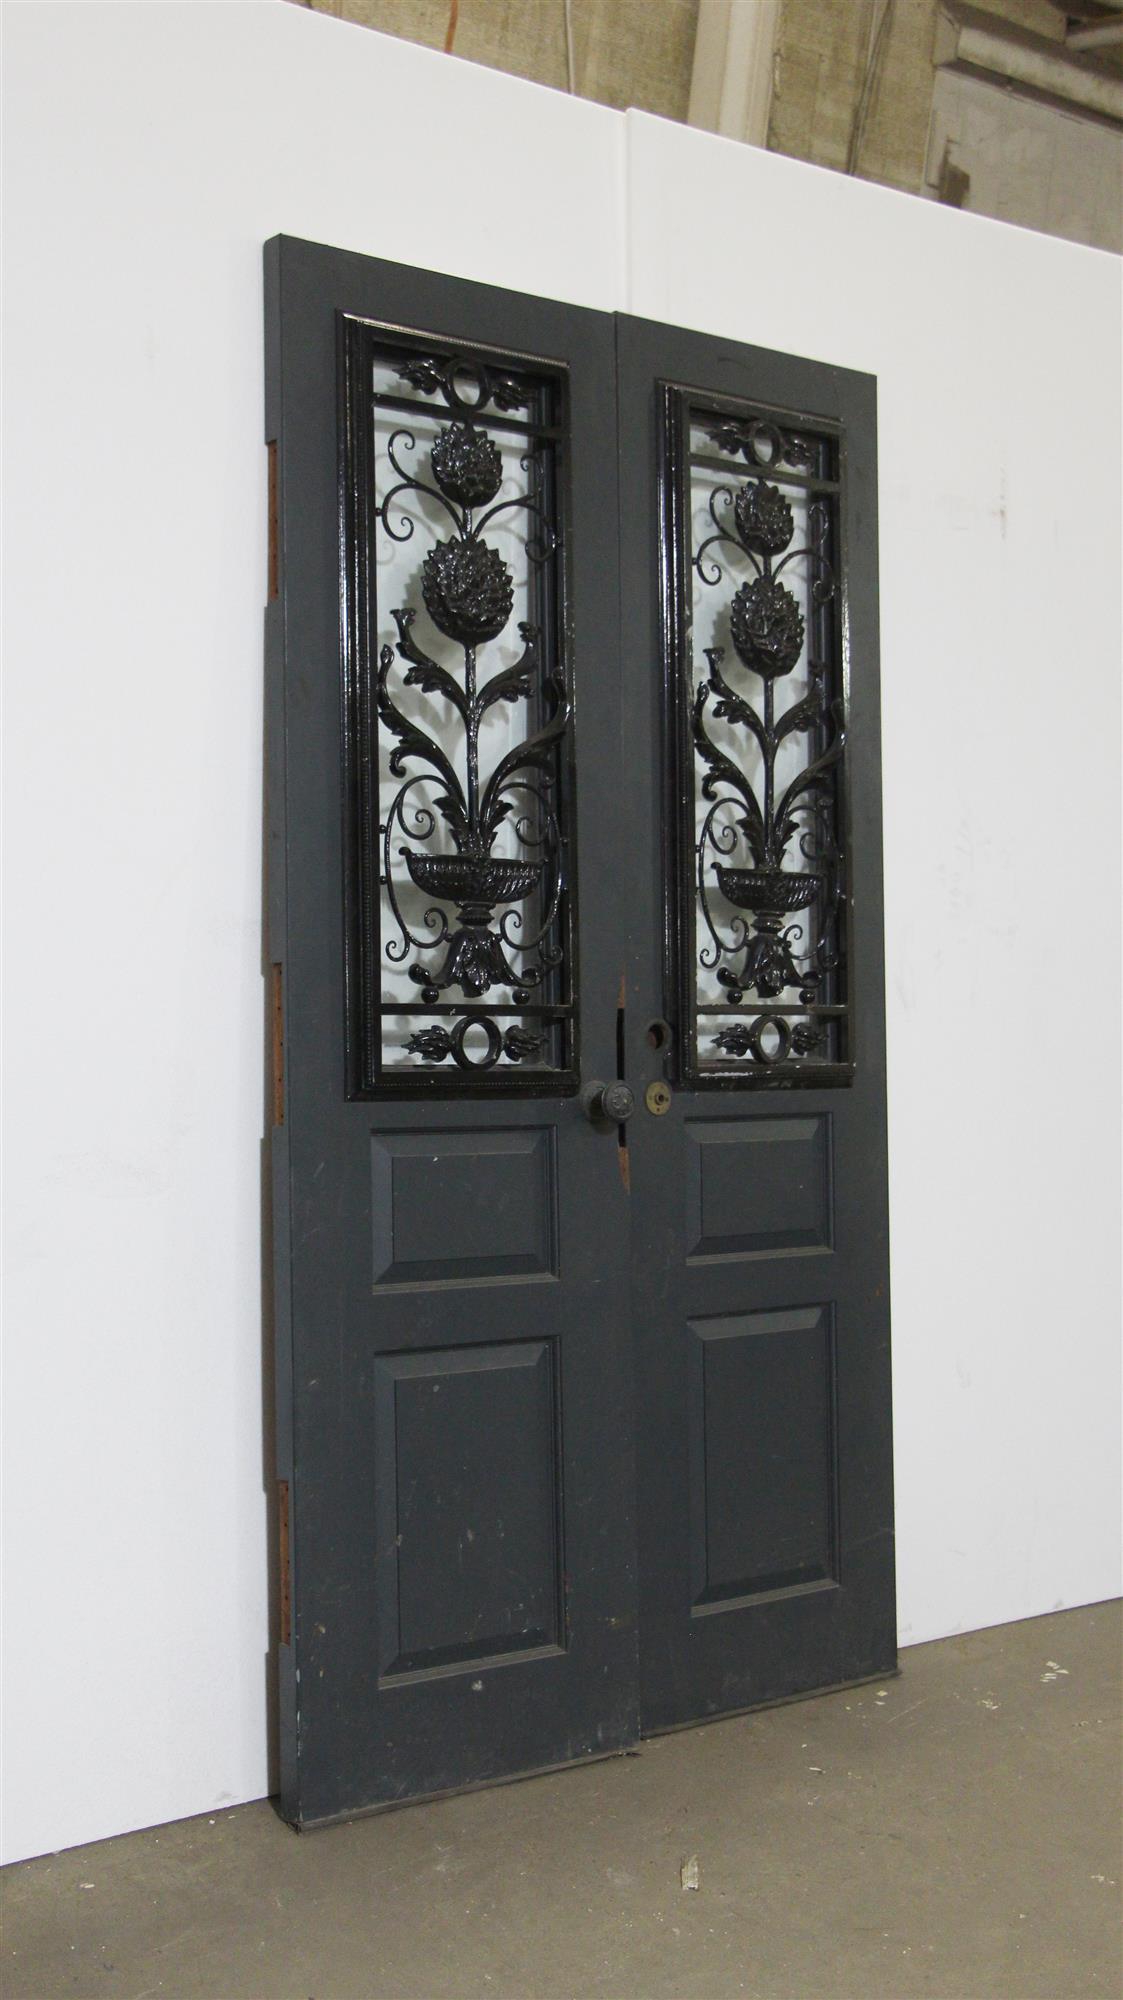 Blue painted wood doors from the 1940s with one vertical glass lite and newer decorative wrought iron window guards on the front. There are two wood panels on the bottom. The doors are painted brown on the opposite side. Some slight cracks in wood.